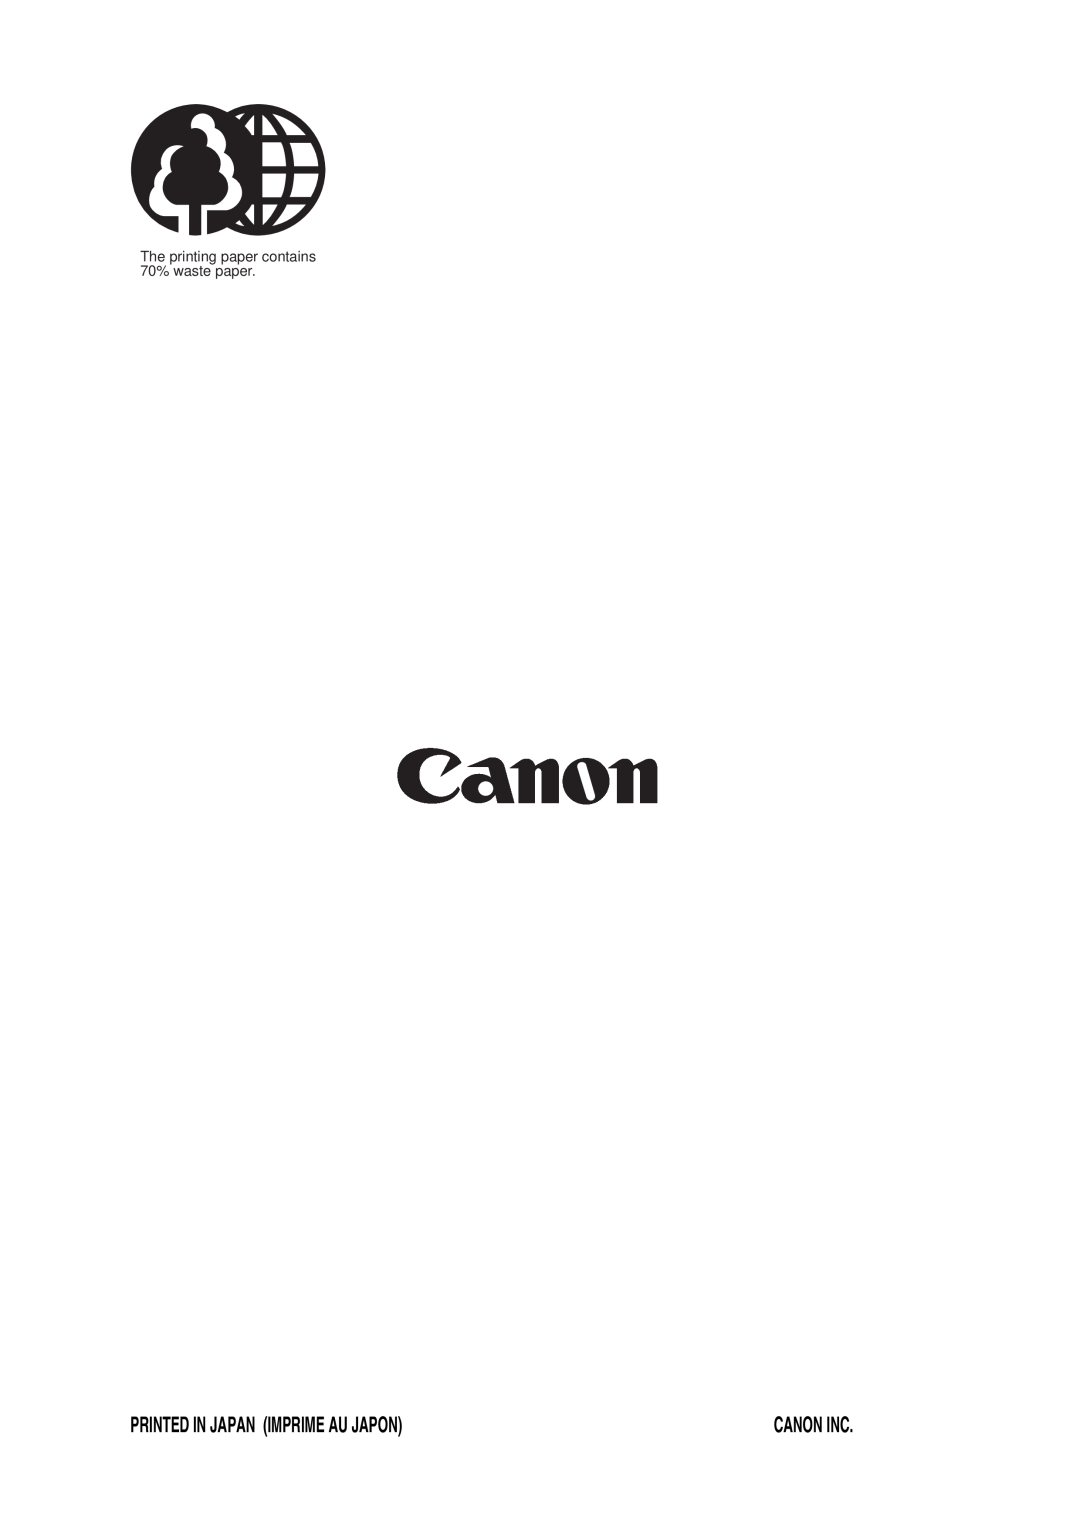 Canon QY8-1360-000 manual Printed In Japan Imprime Au Japon, The printing paper contains 70% waste paper 